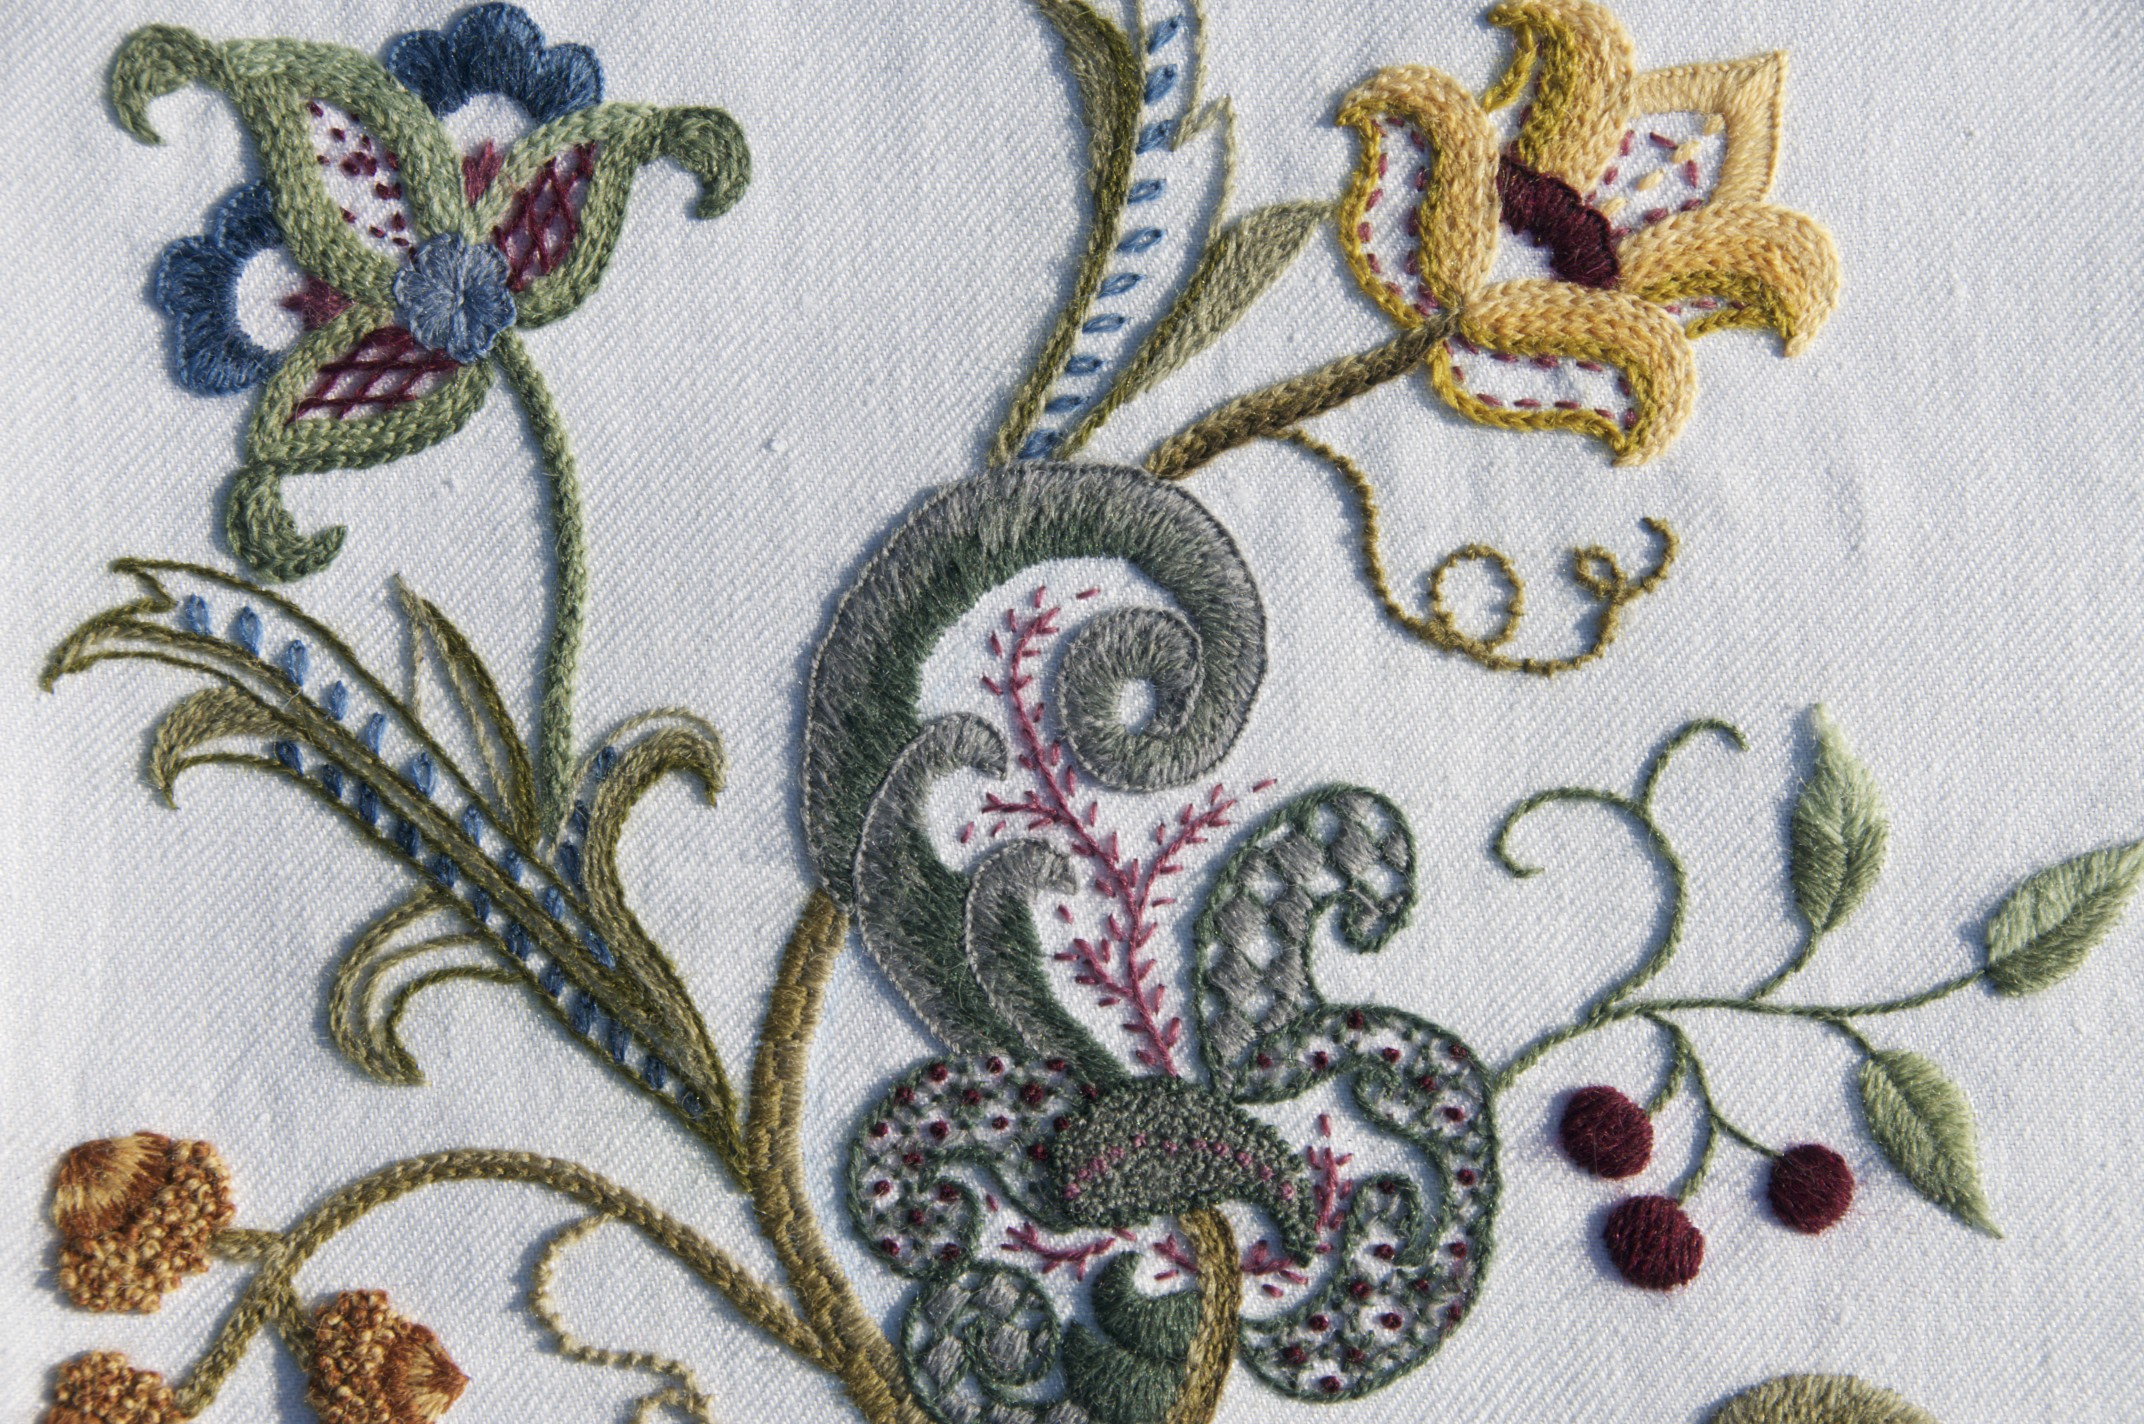 Jacobean Crewel Embroidery Patterns What Is Crewel Embroidery Learn With Me